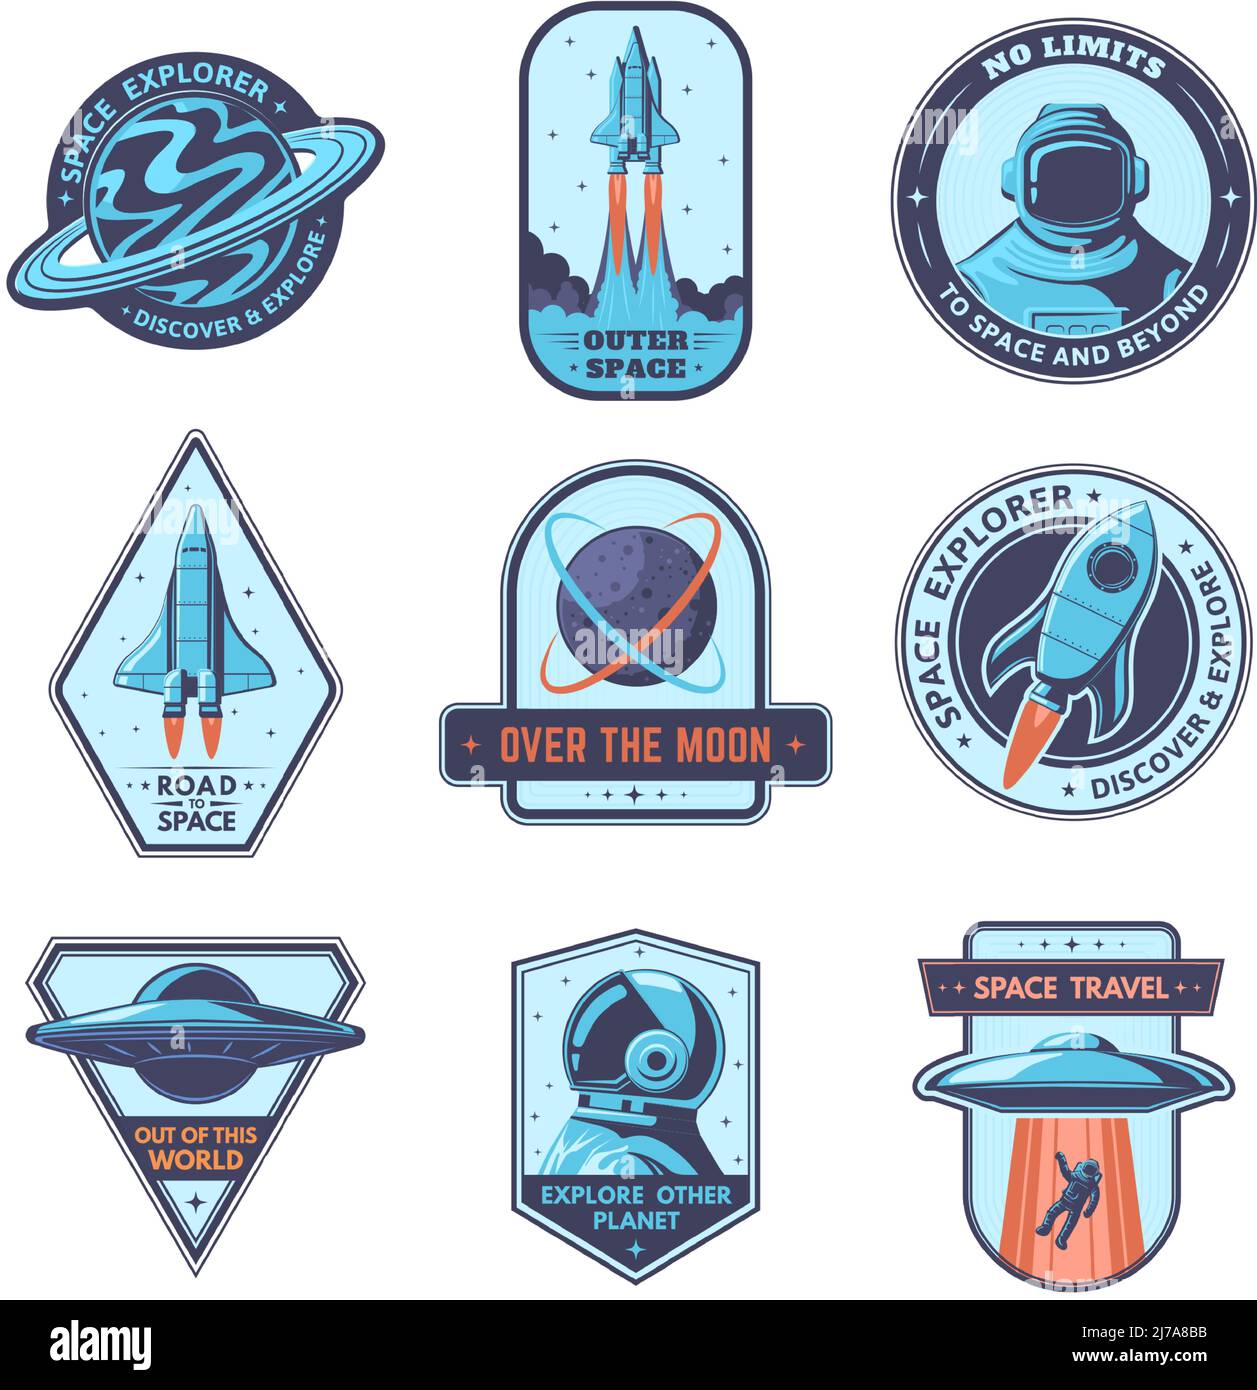 Space badges. Expore other planer patches, space travel badge and over the moon emblem vector set Stock Vector